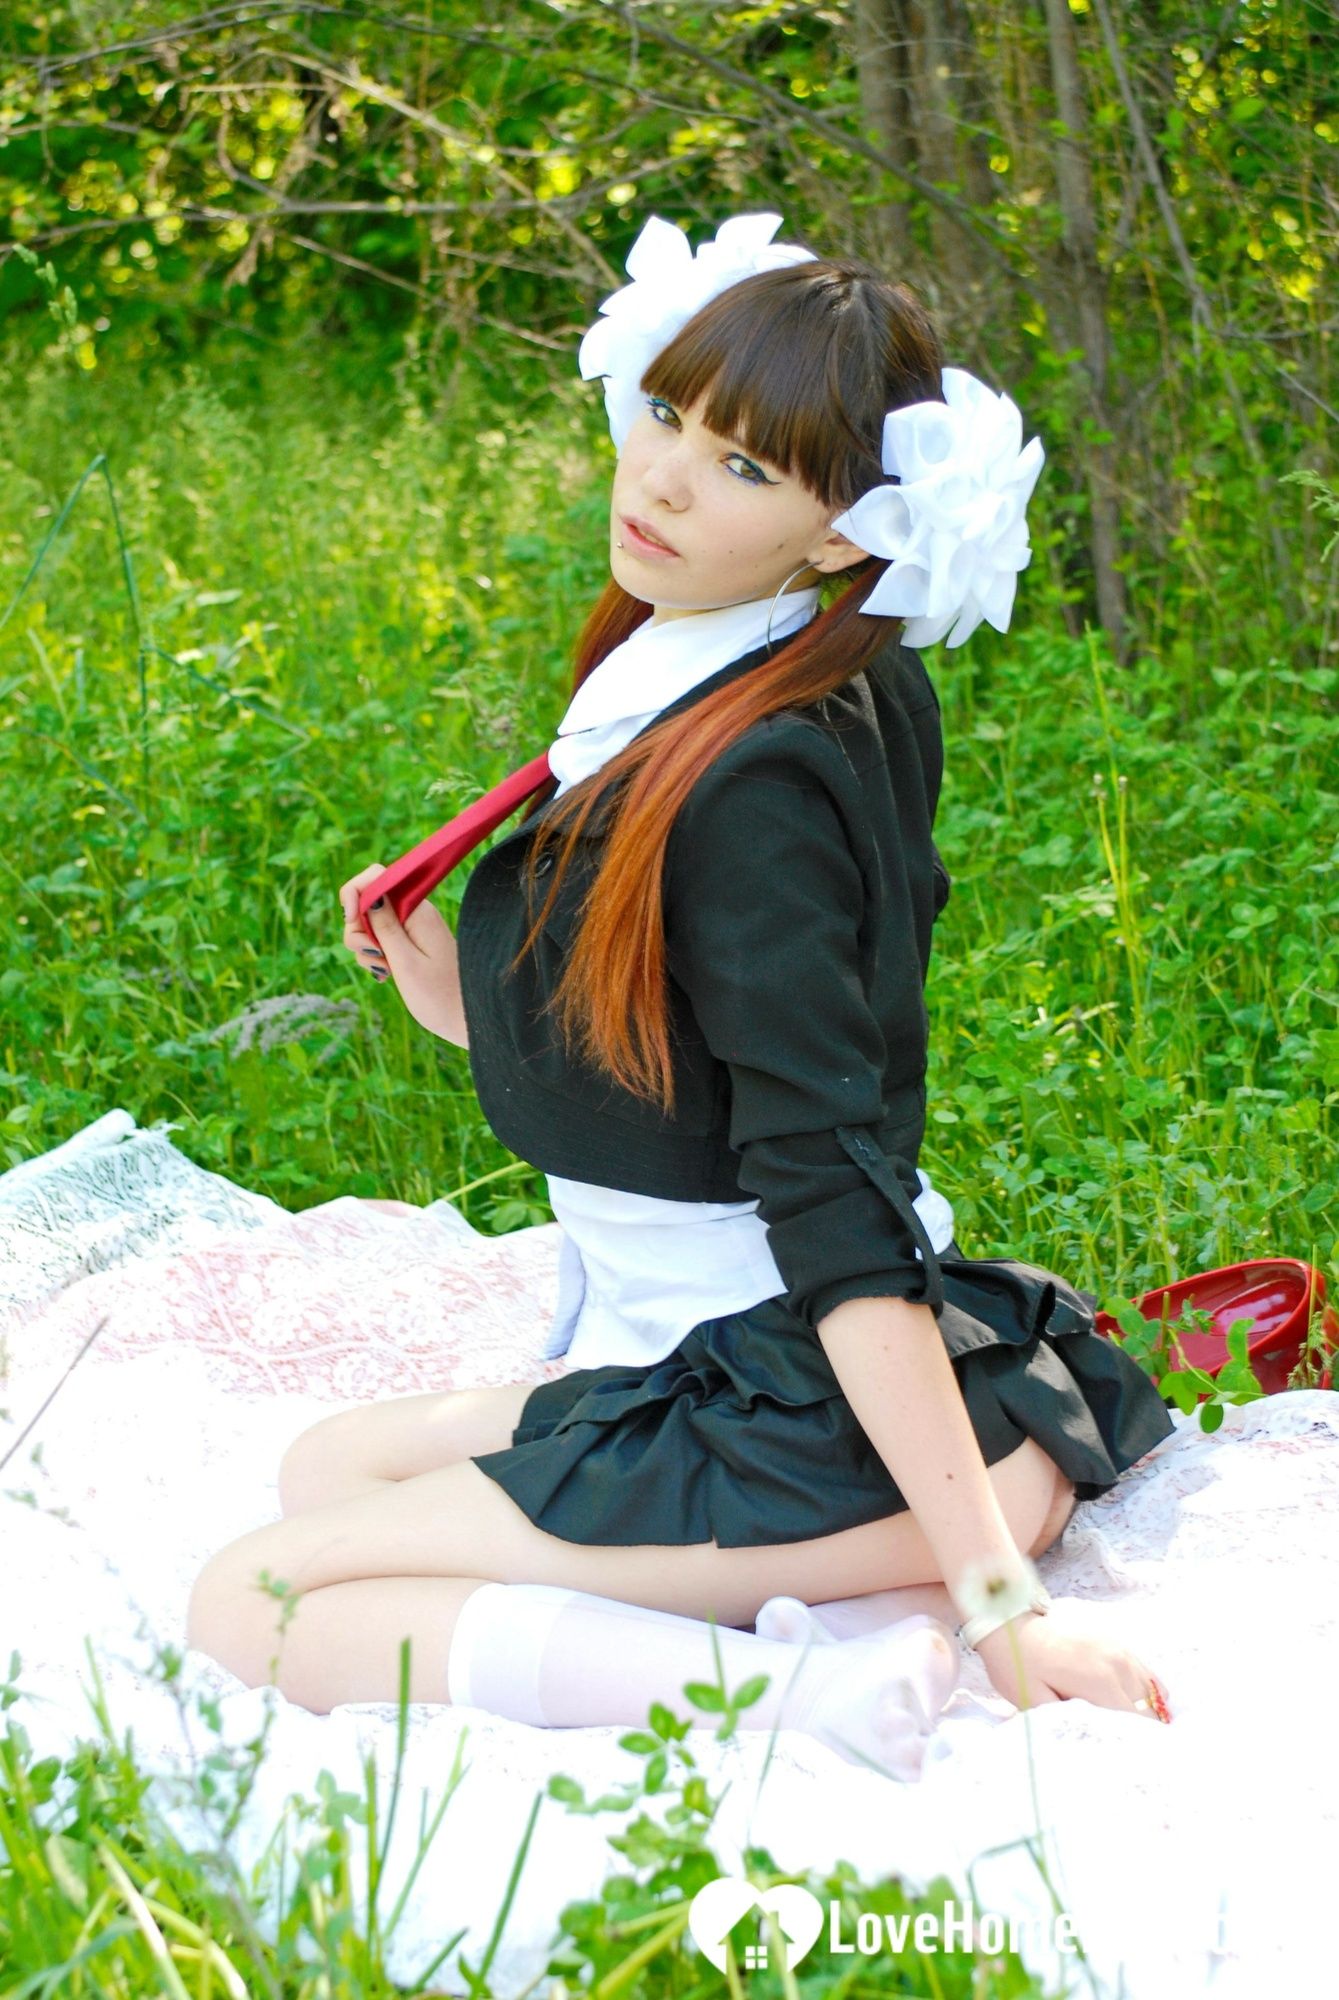 Schoolgirl turns a picnic into a teasing session #7